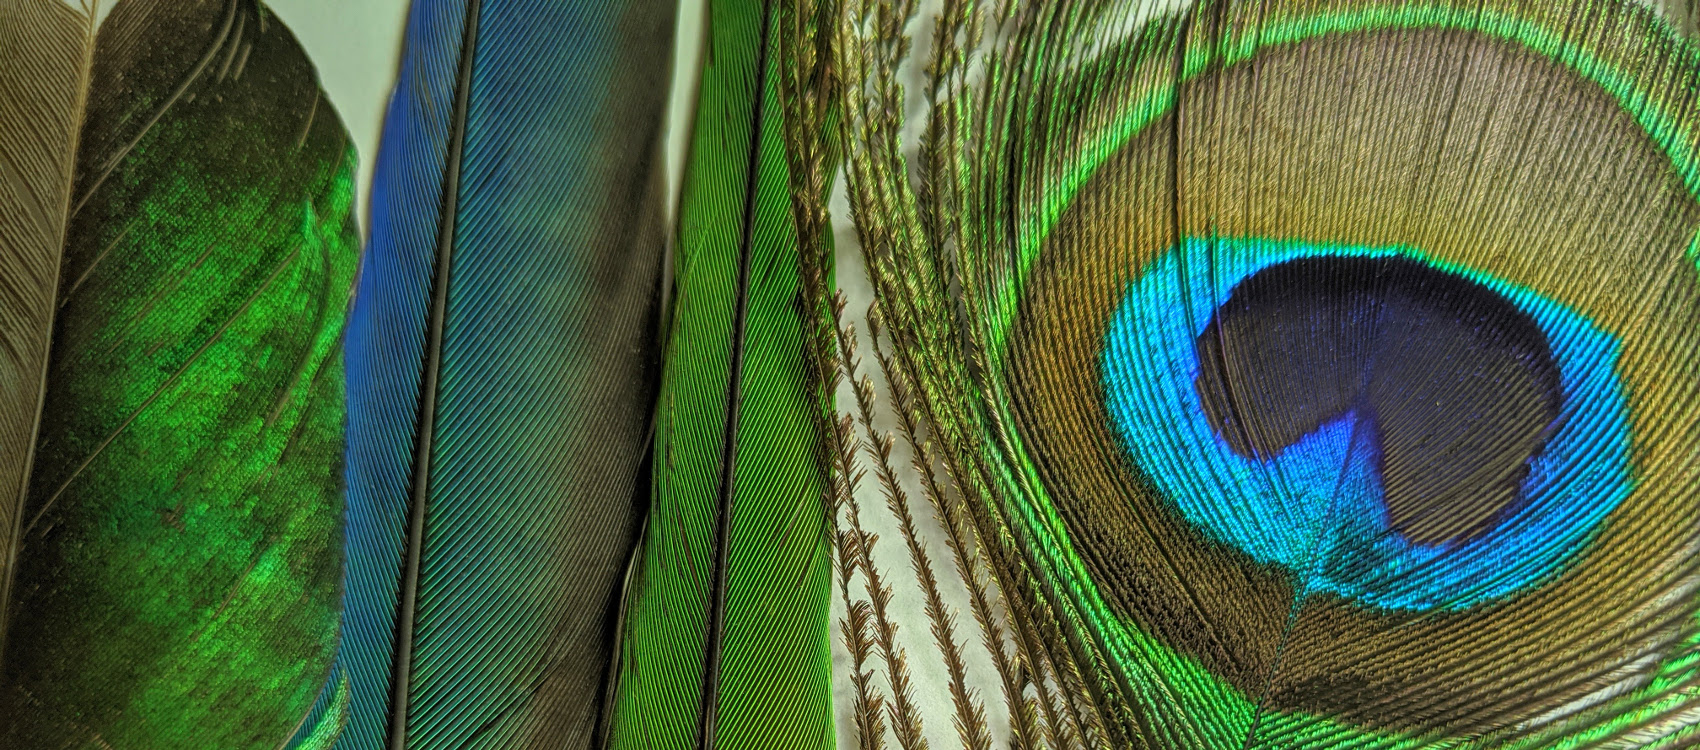 13 Fabulous Facts About Extreme Bird Feathers - Birds and Blooms